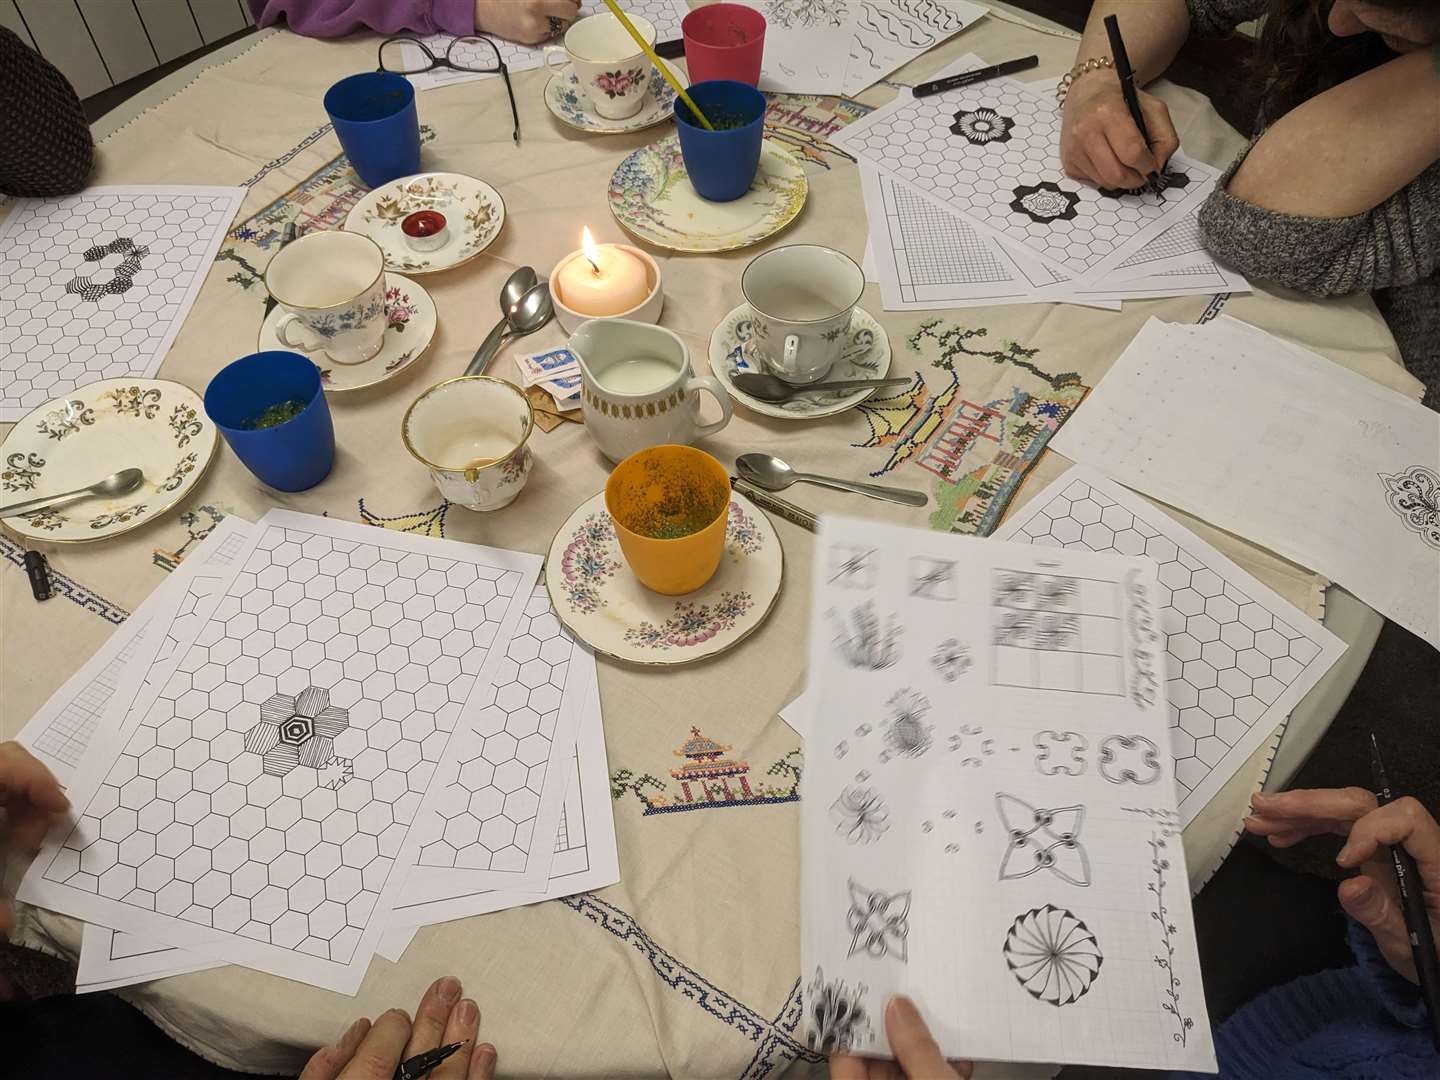 Mindful drawing was one of the activities at the holistic night.